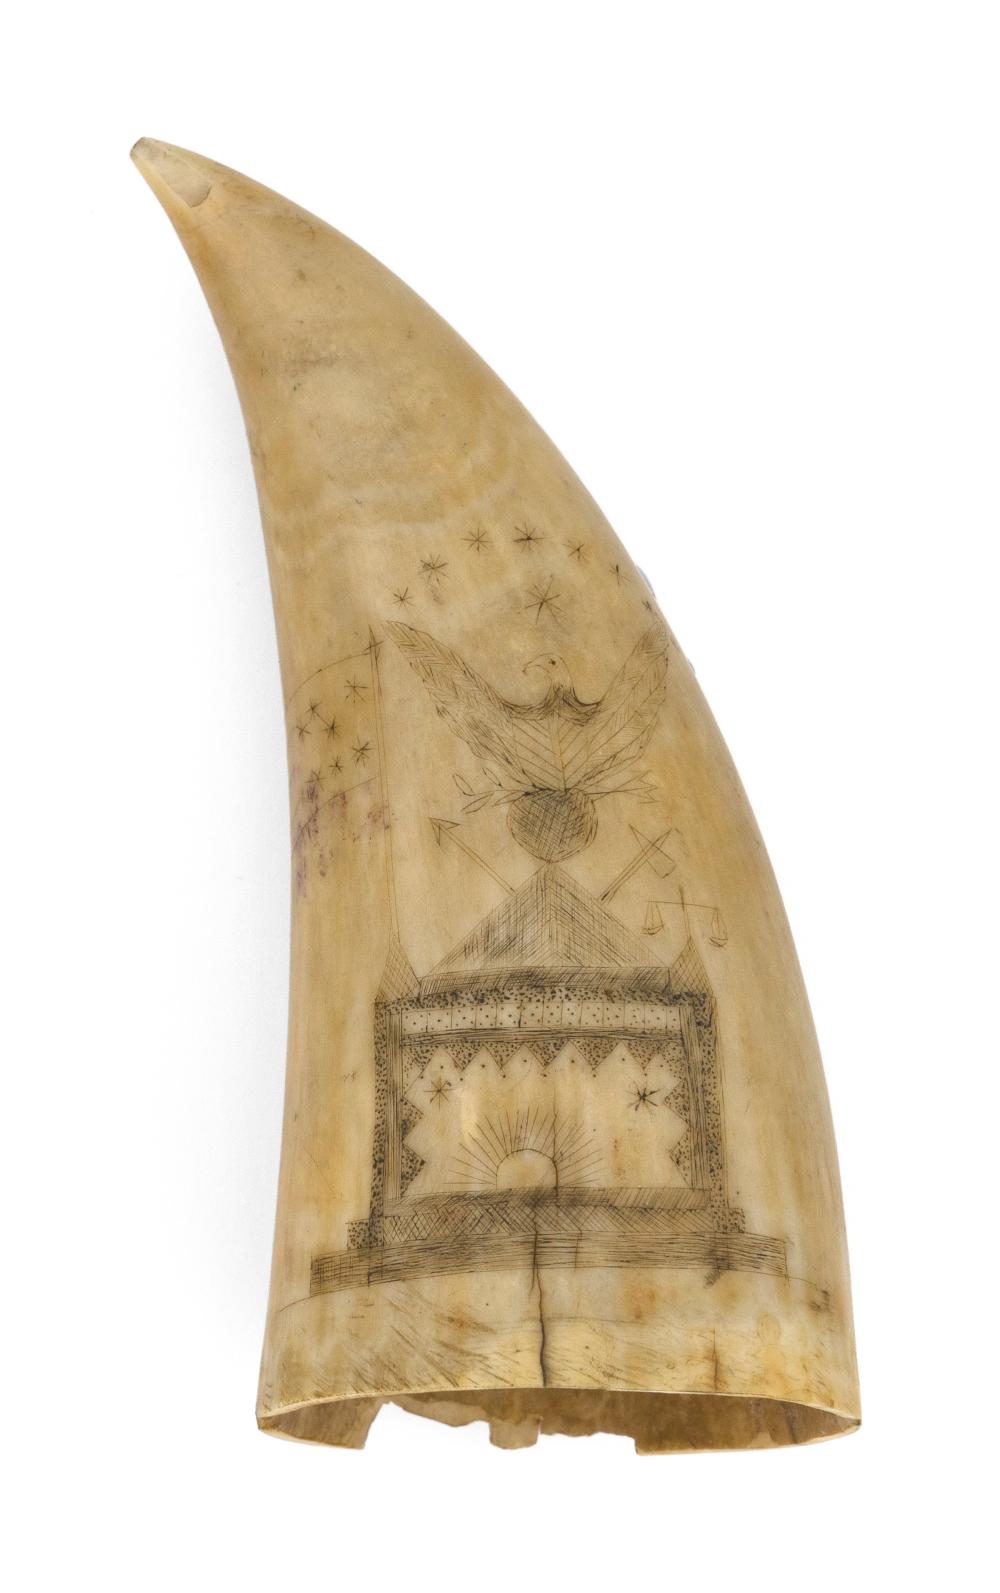 SCRIMSHAW WHALE'S TOOTH WITH MASONIC